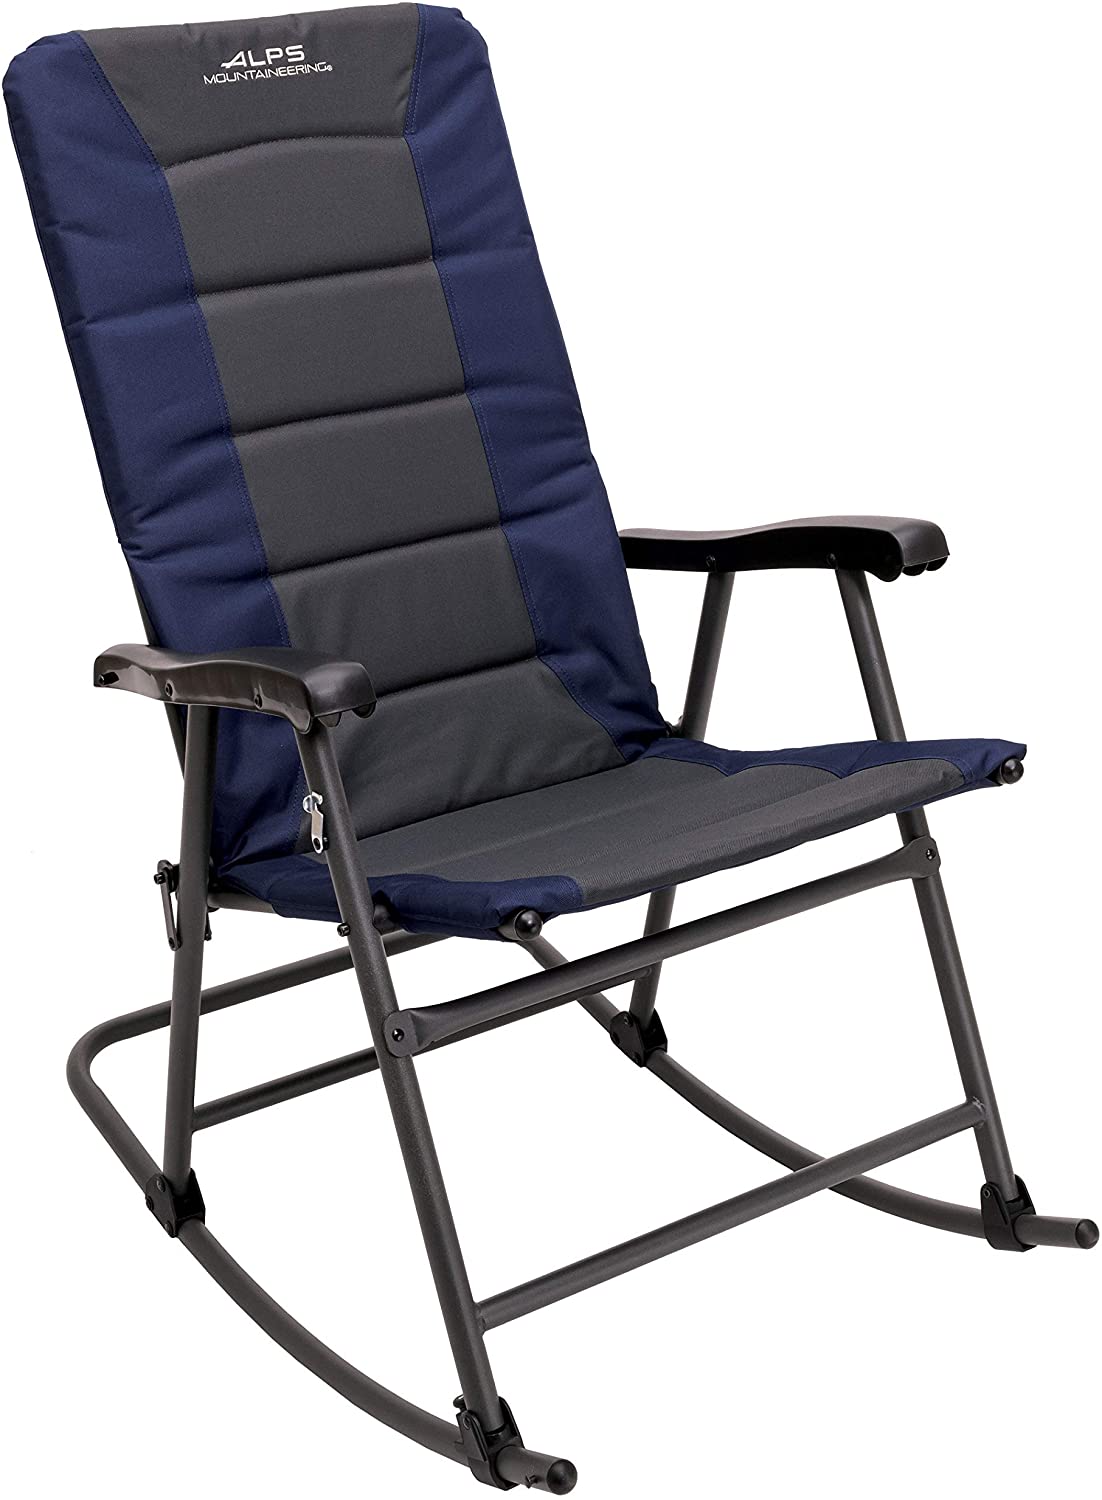 ALPS Mountaineering 600D Polyester Fabric Powder-Coated Steel Frame Fold-Up Rocking Chair